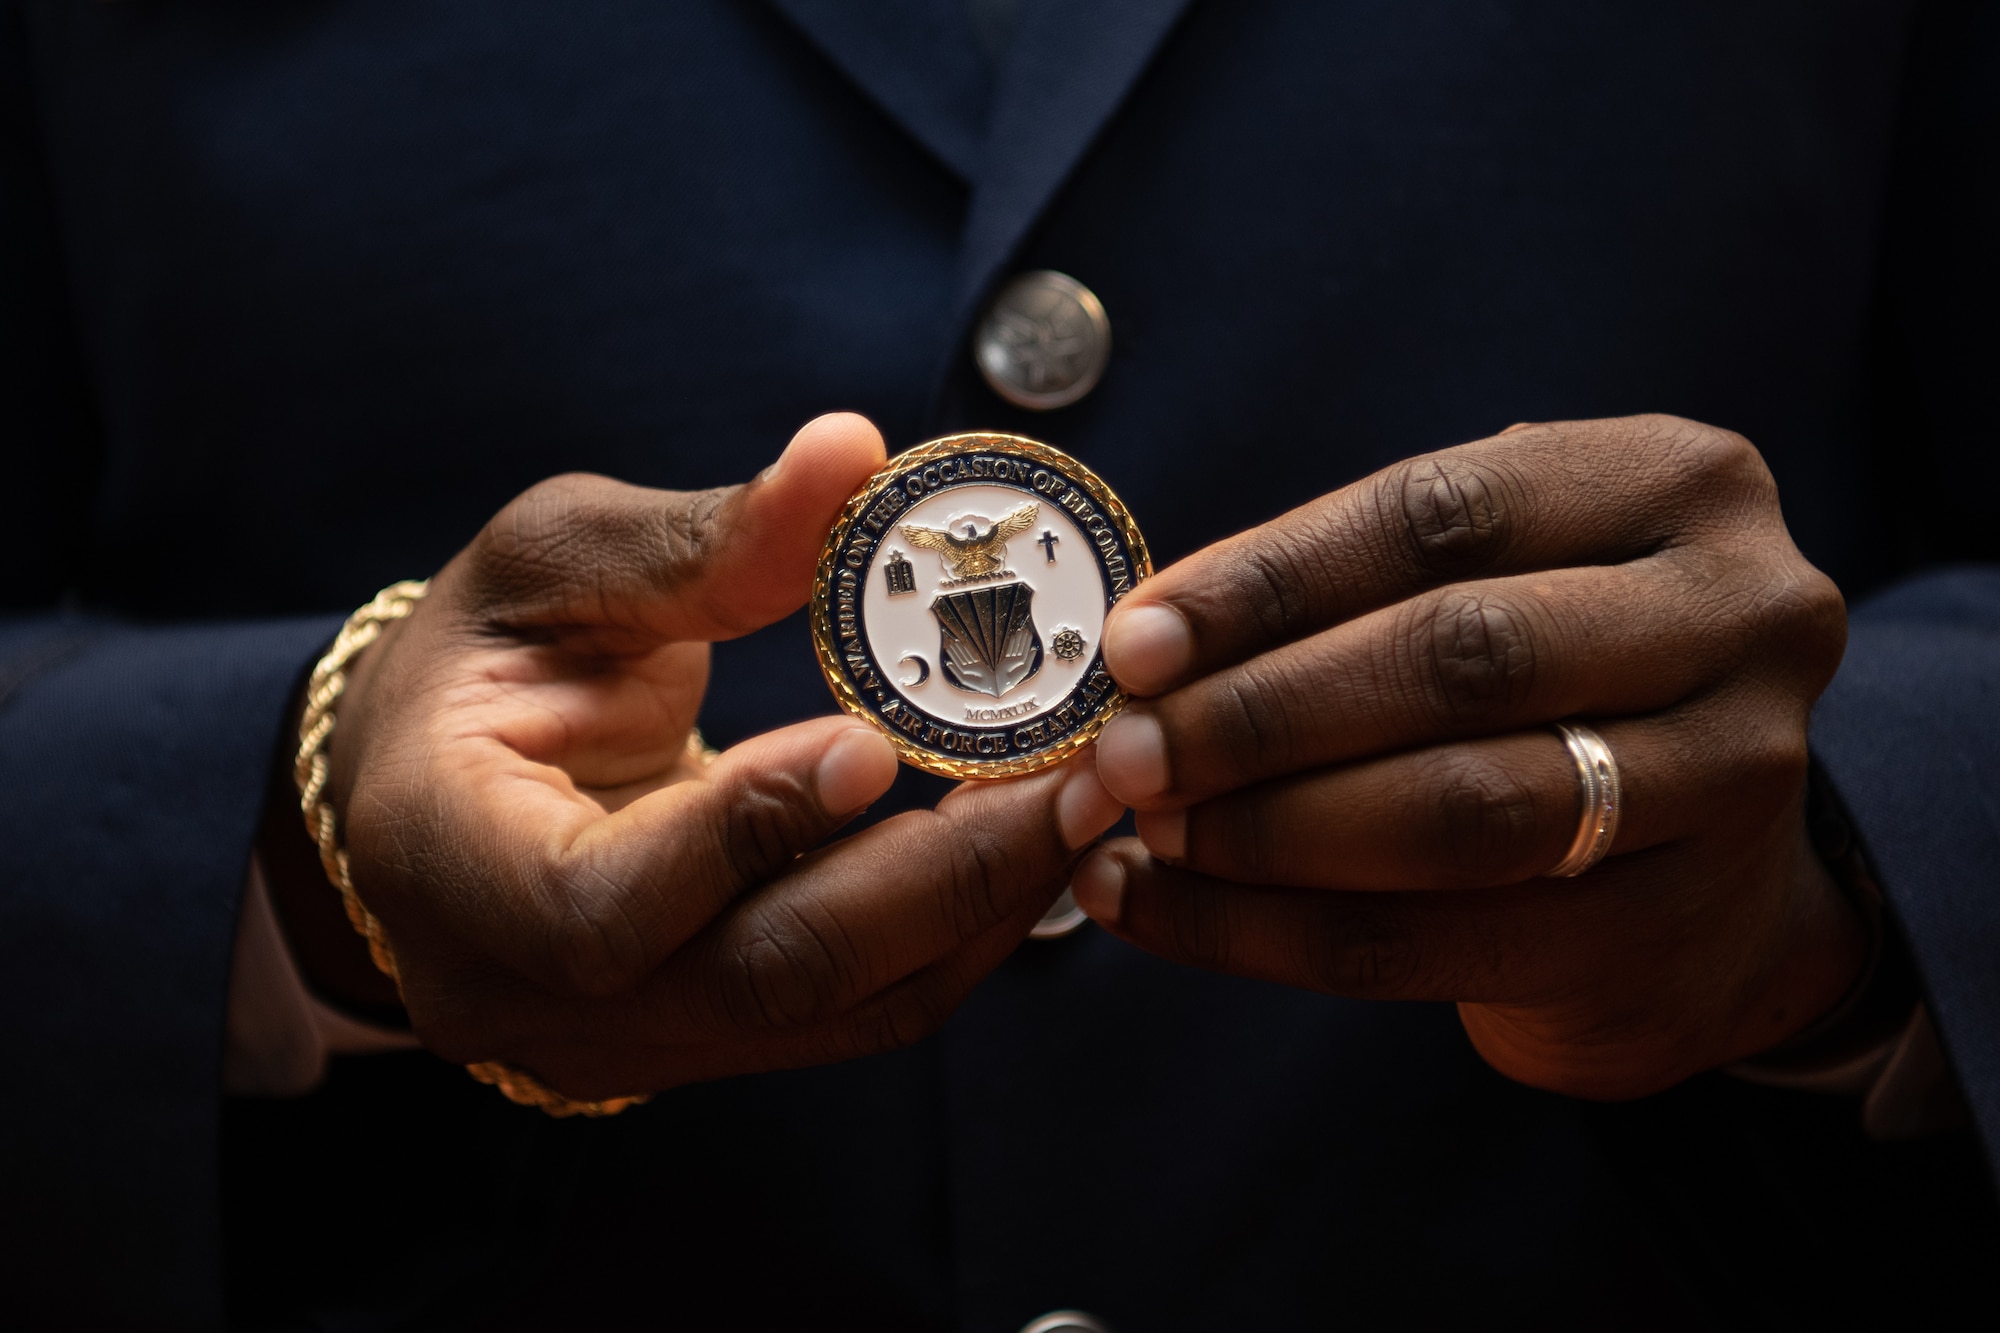 1st Lt. Fred Gallop III, a graduate of Basic Chaplain Course Class 21A, holds his Air Force chaplain coin up for a photo Feb. 5, 2021, at the Ira C. Eaker Center for Leadership Development on Maxwell Air Force Base, Ala. Each graduate was presented with a numbered coin during the graduation ceremony.